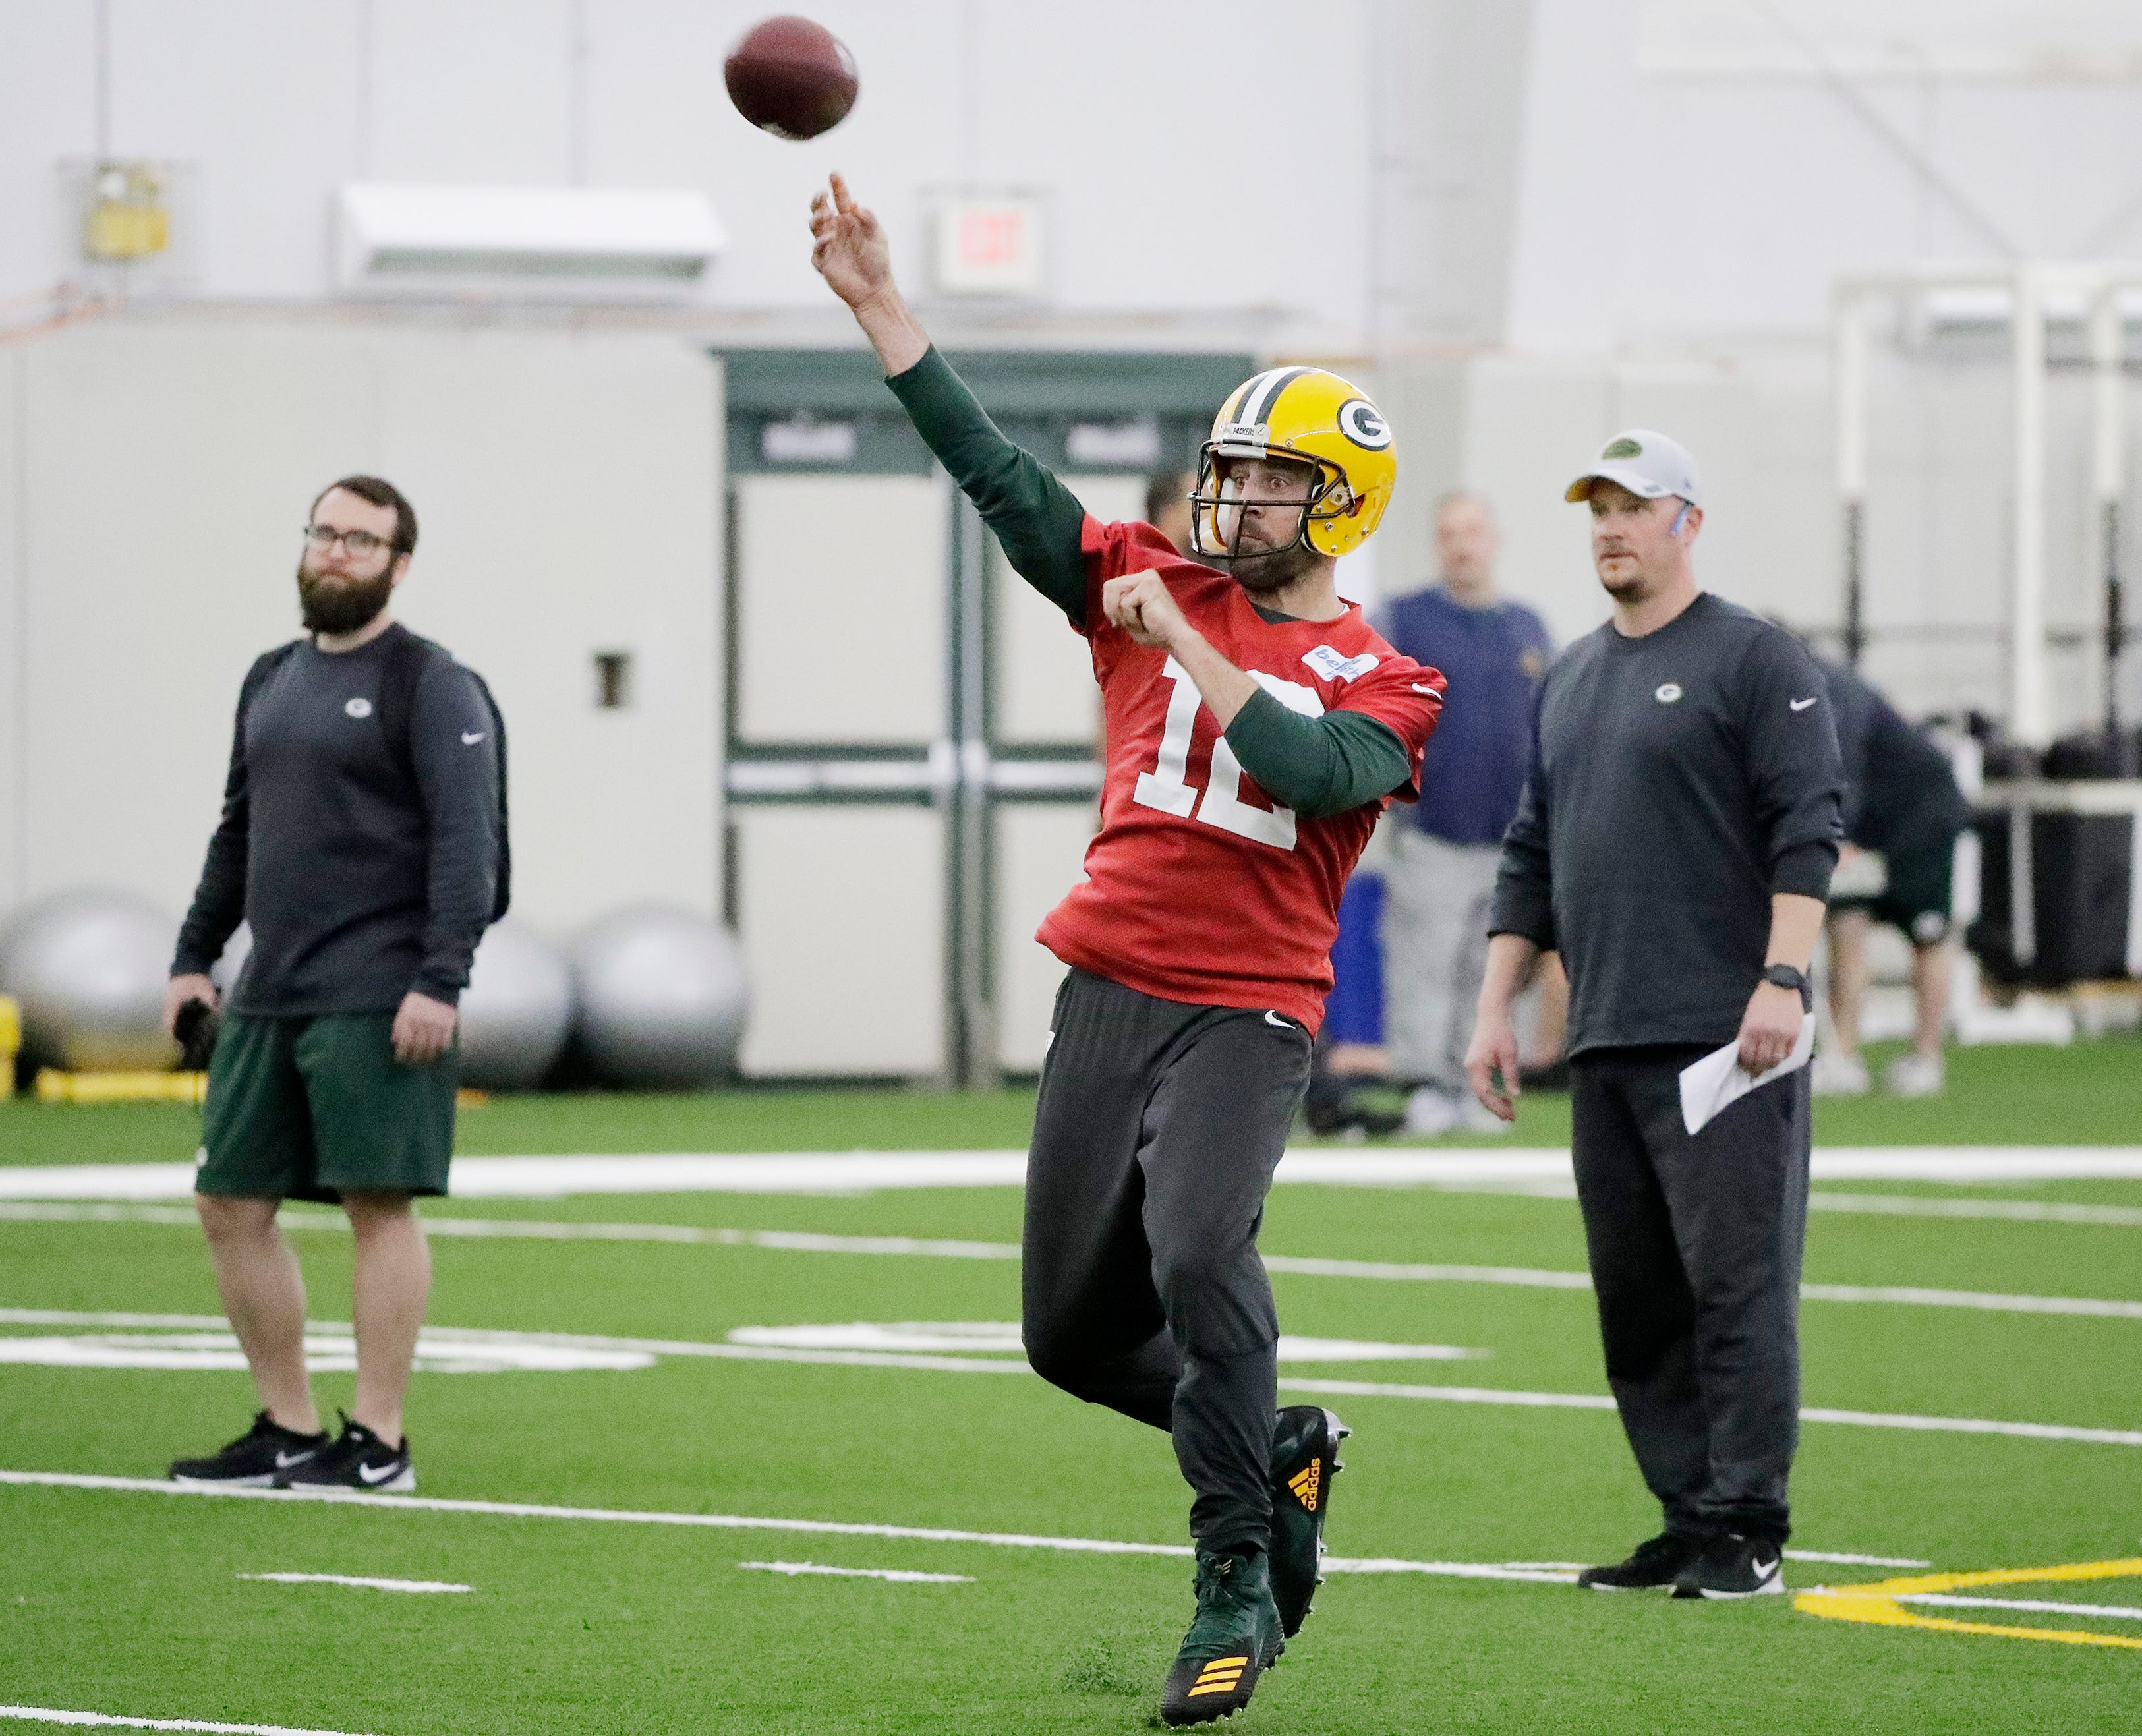 Green Bay Packers quarterback Aaron Rodgers (12) throws during a team practice at the Don Hutson Center on Wednesday, April 24, 2019 in Ashwaubenon, Wis.